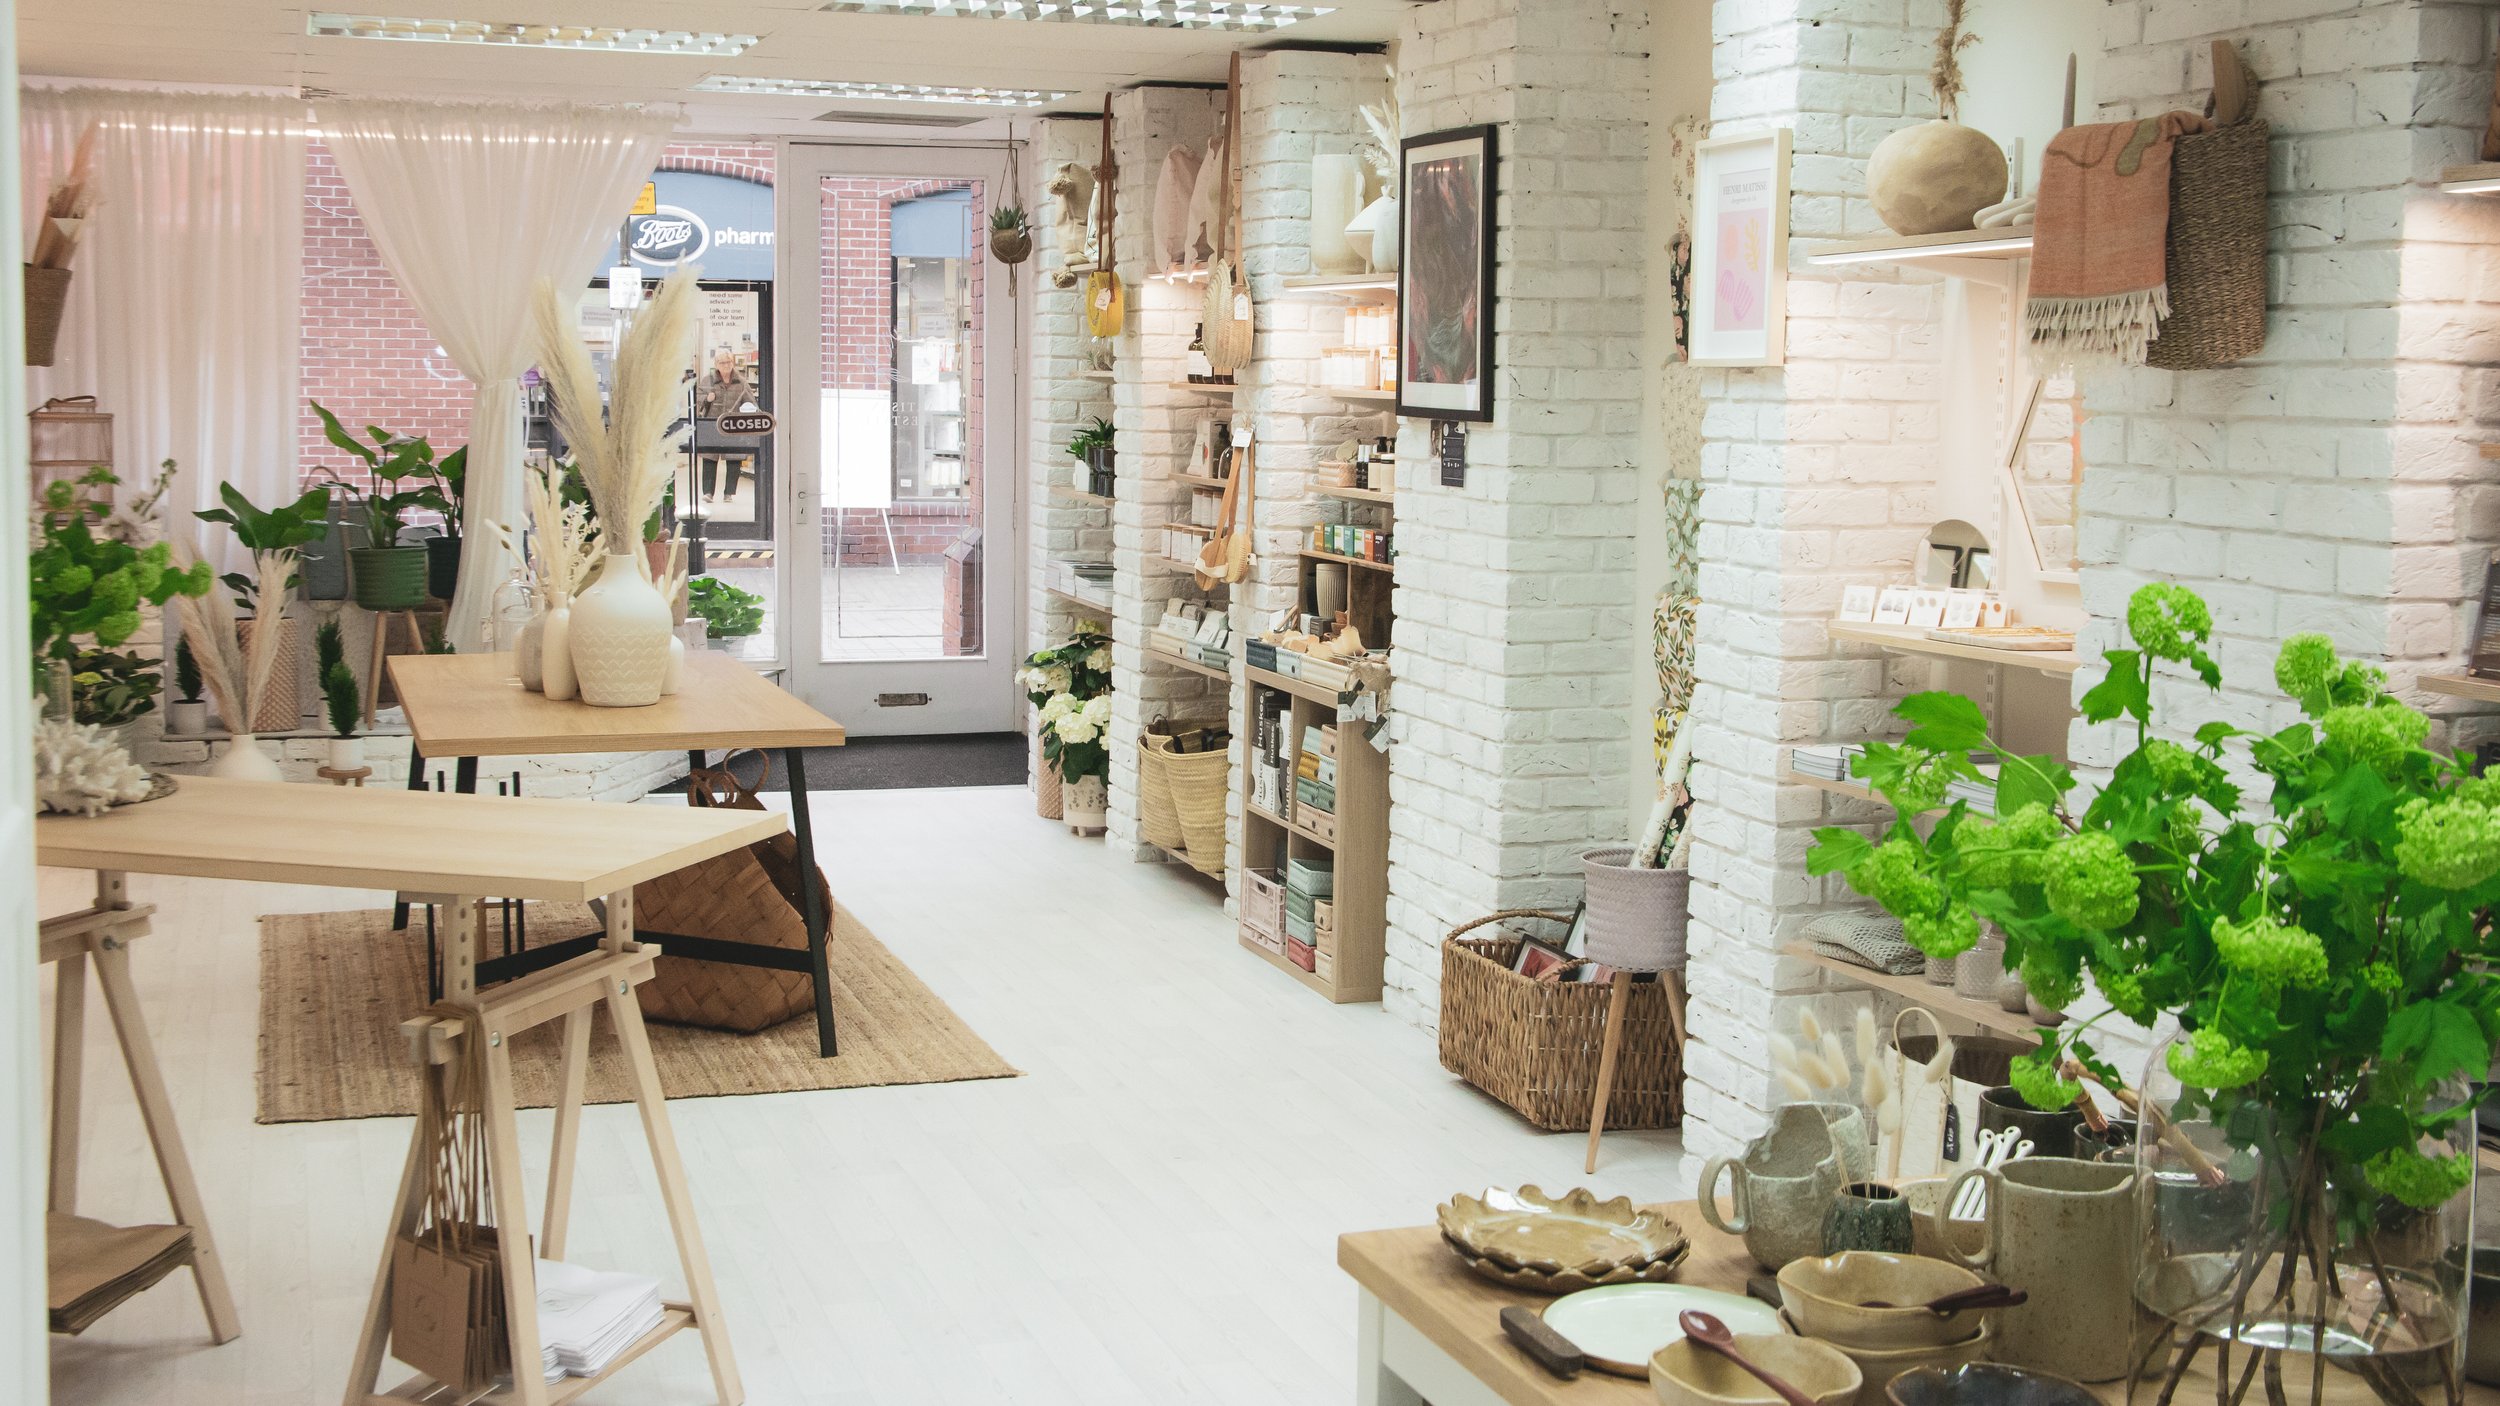 Inside independent homeware store Lively, Staffordshire